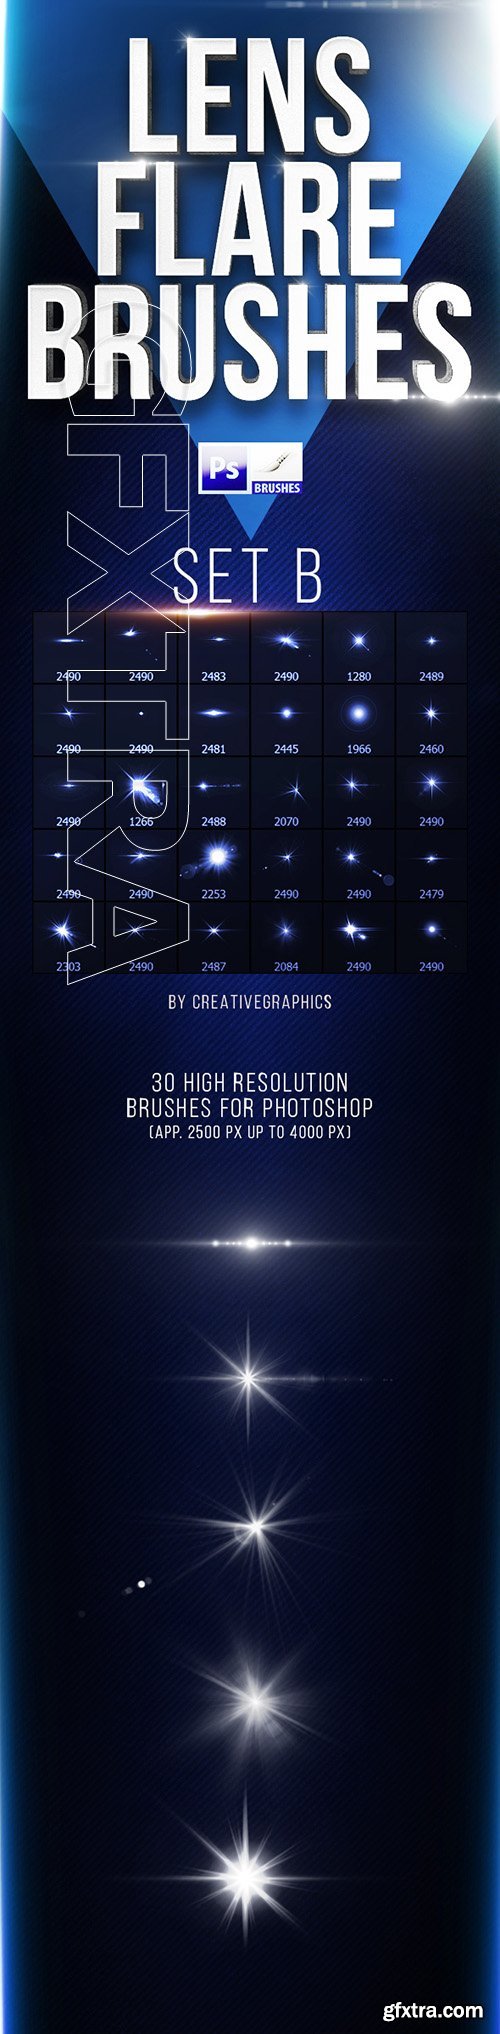 GraphicRiver - 30 Lens Flare Brushes for Photoshop Set B 22163004